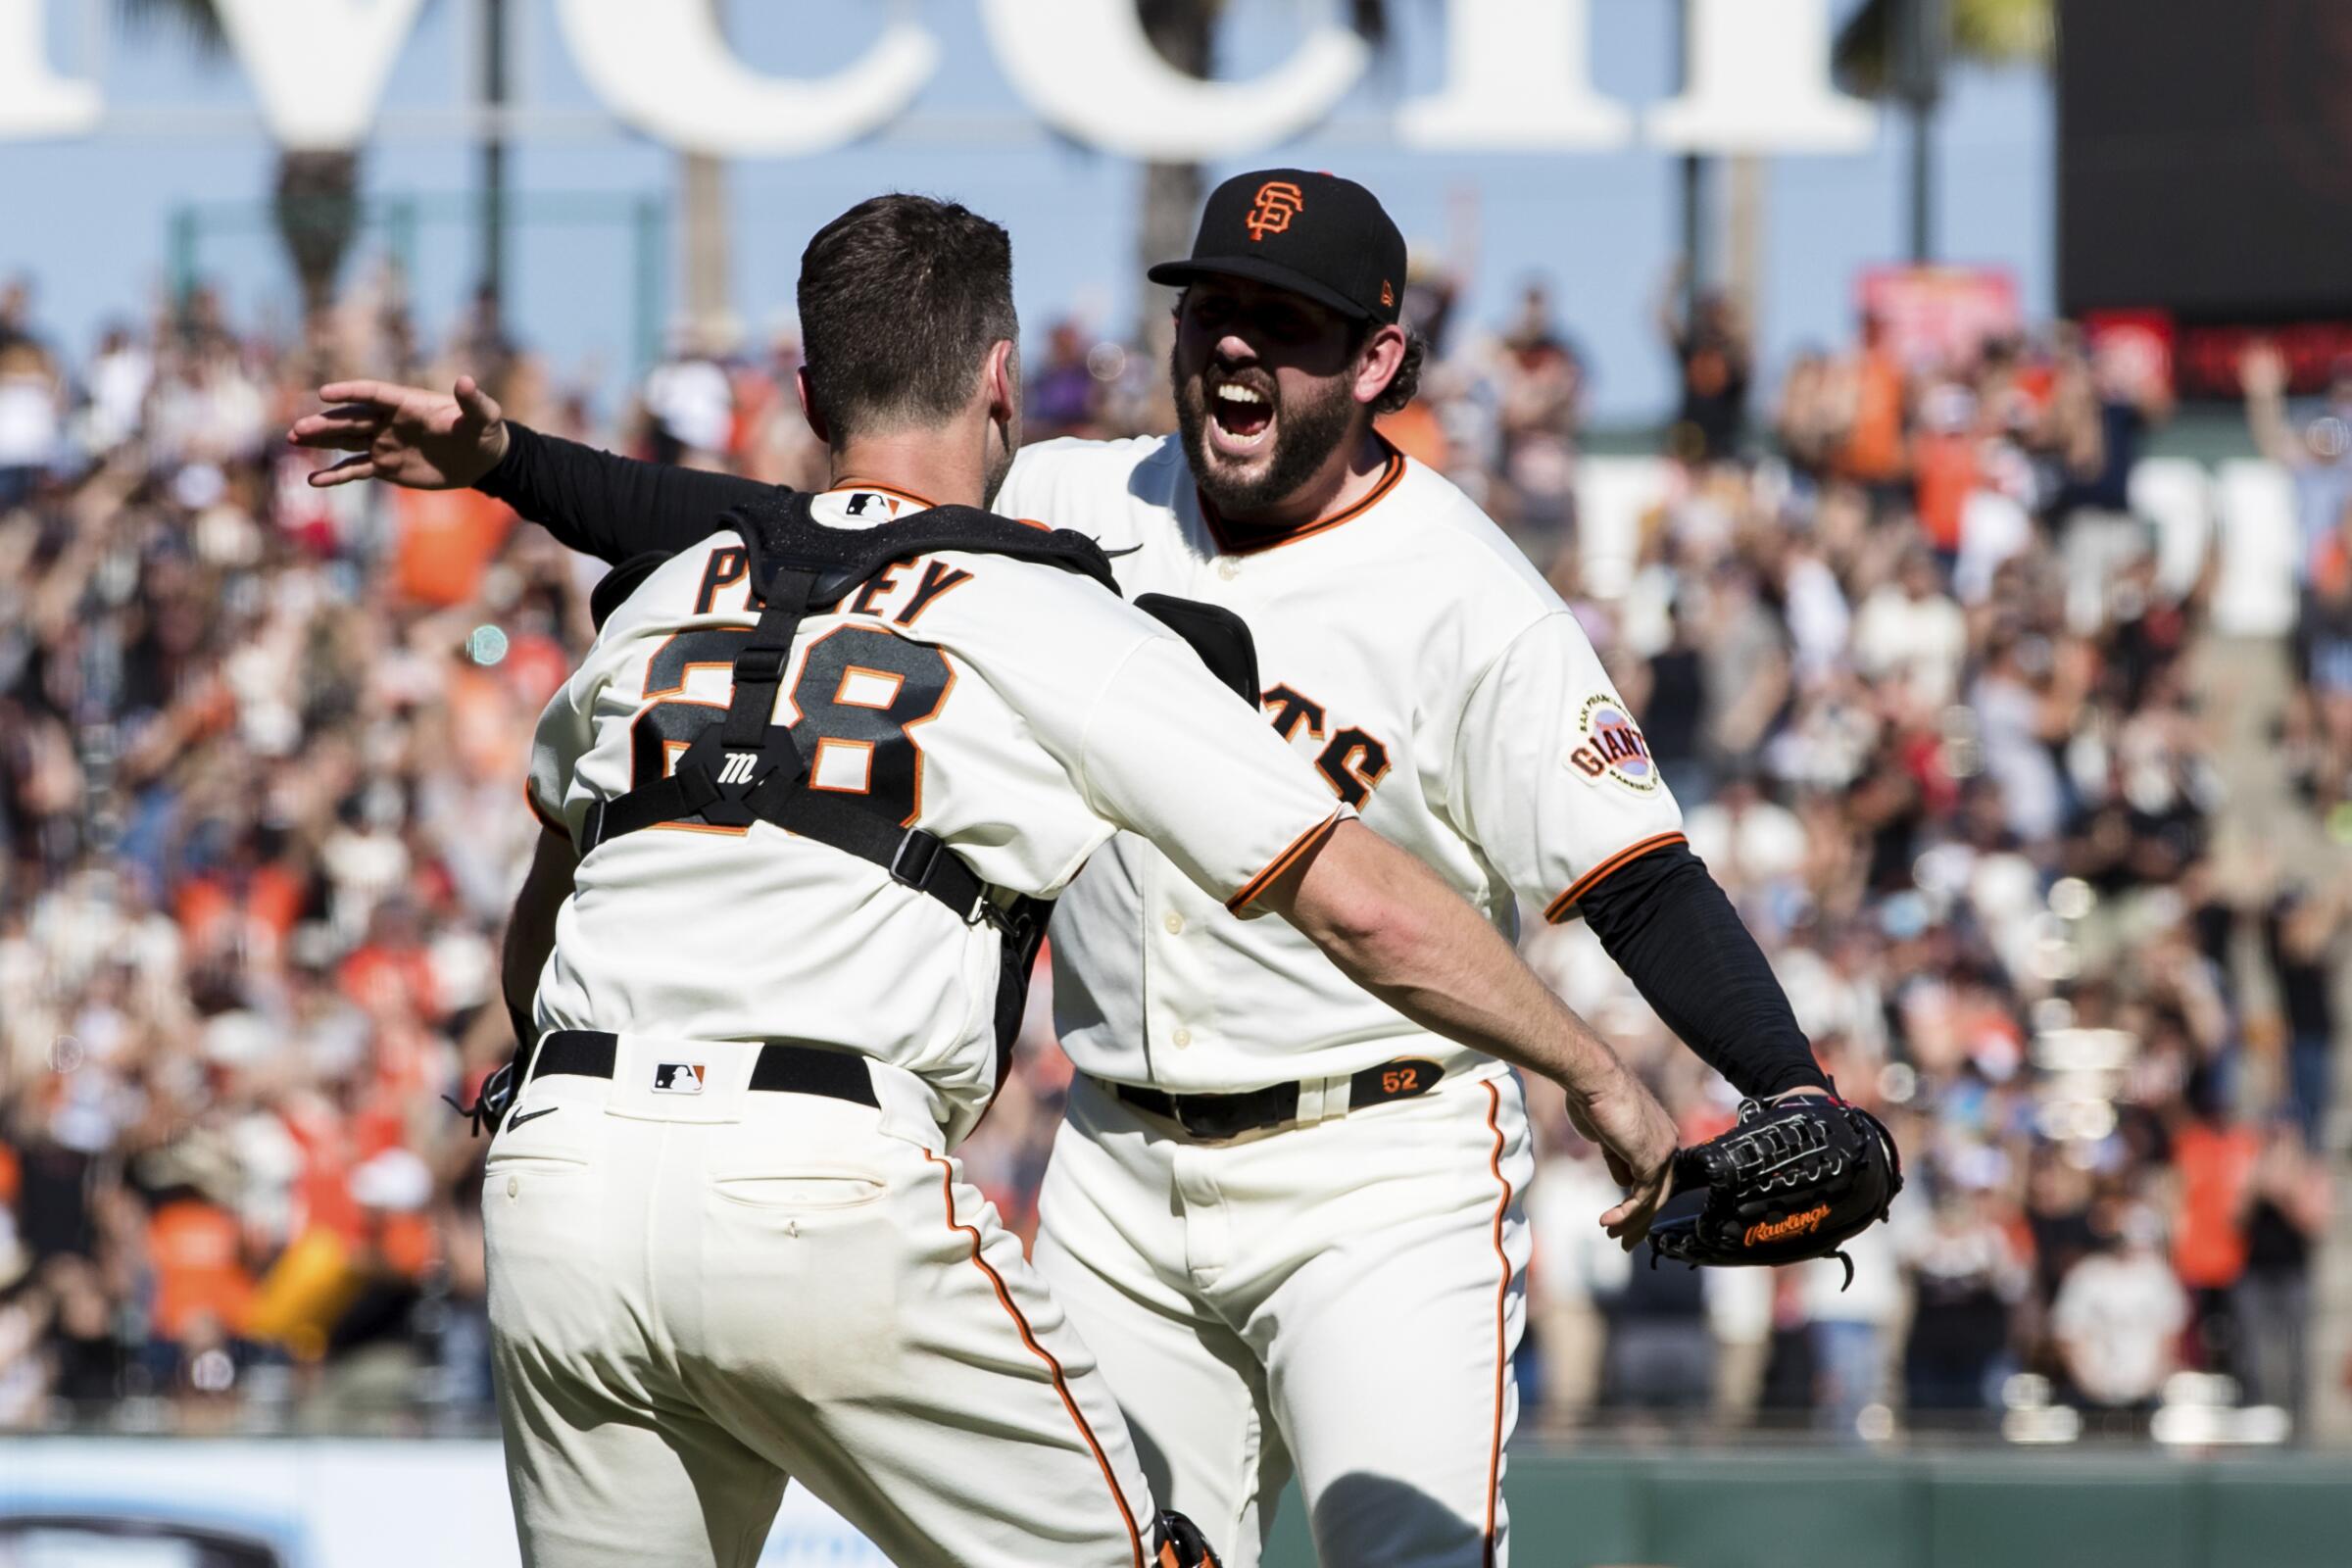 Dominic Leone, right, and Buster Posey celebrate winning the NL West on Sunday.